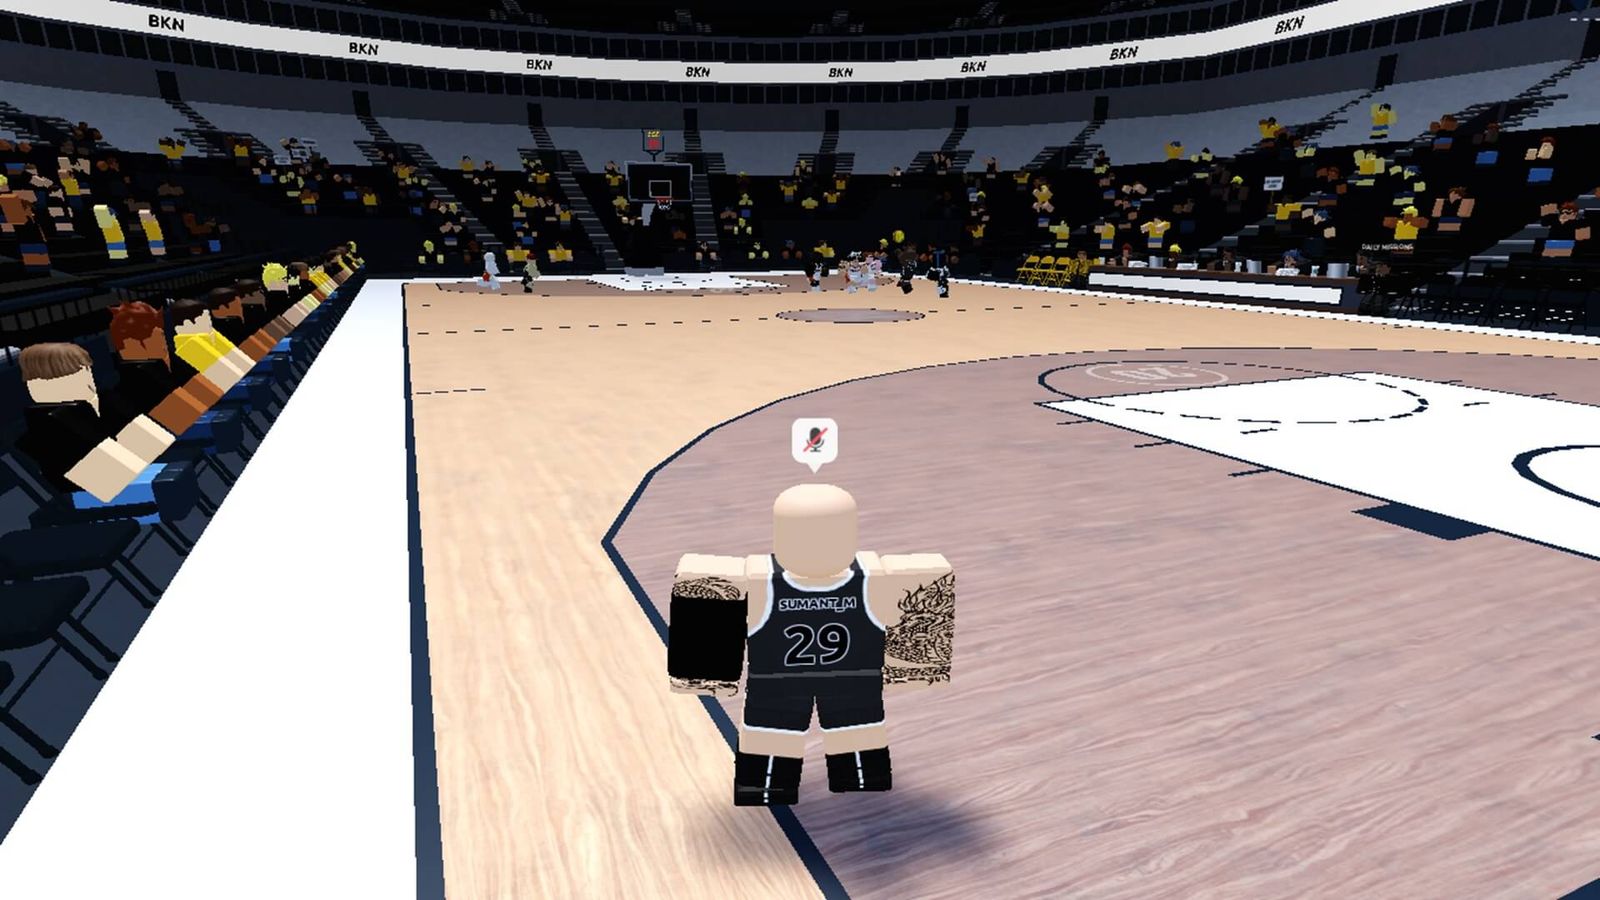 Roblox character standing on basketball court